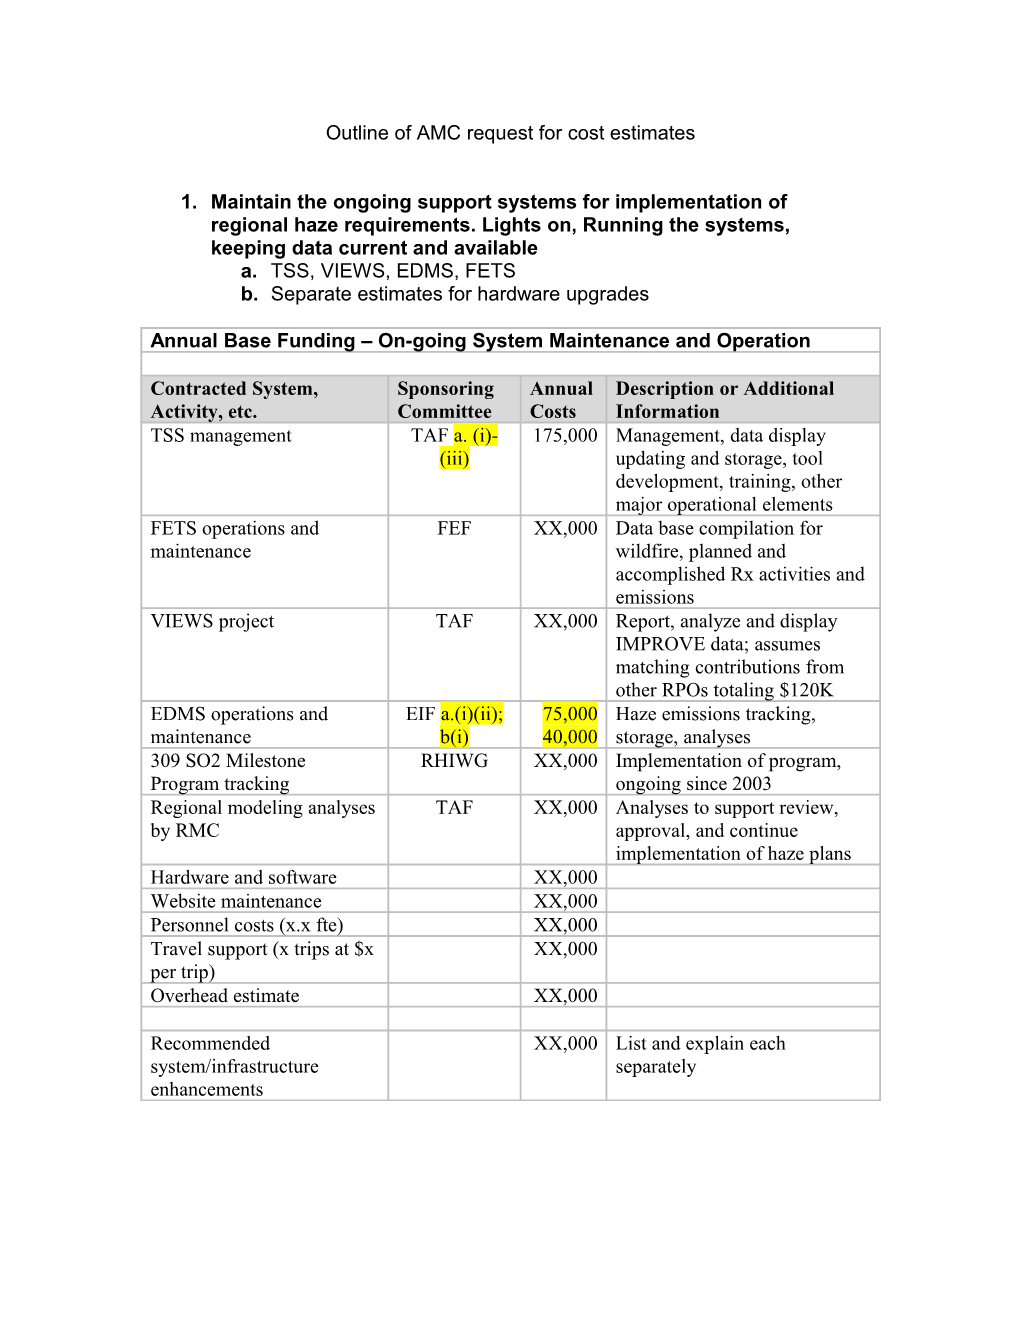 Outline of AMC Request for Cost Estimates